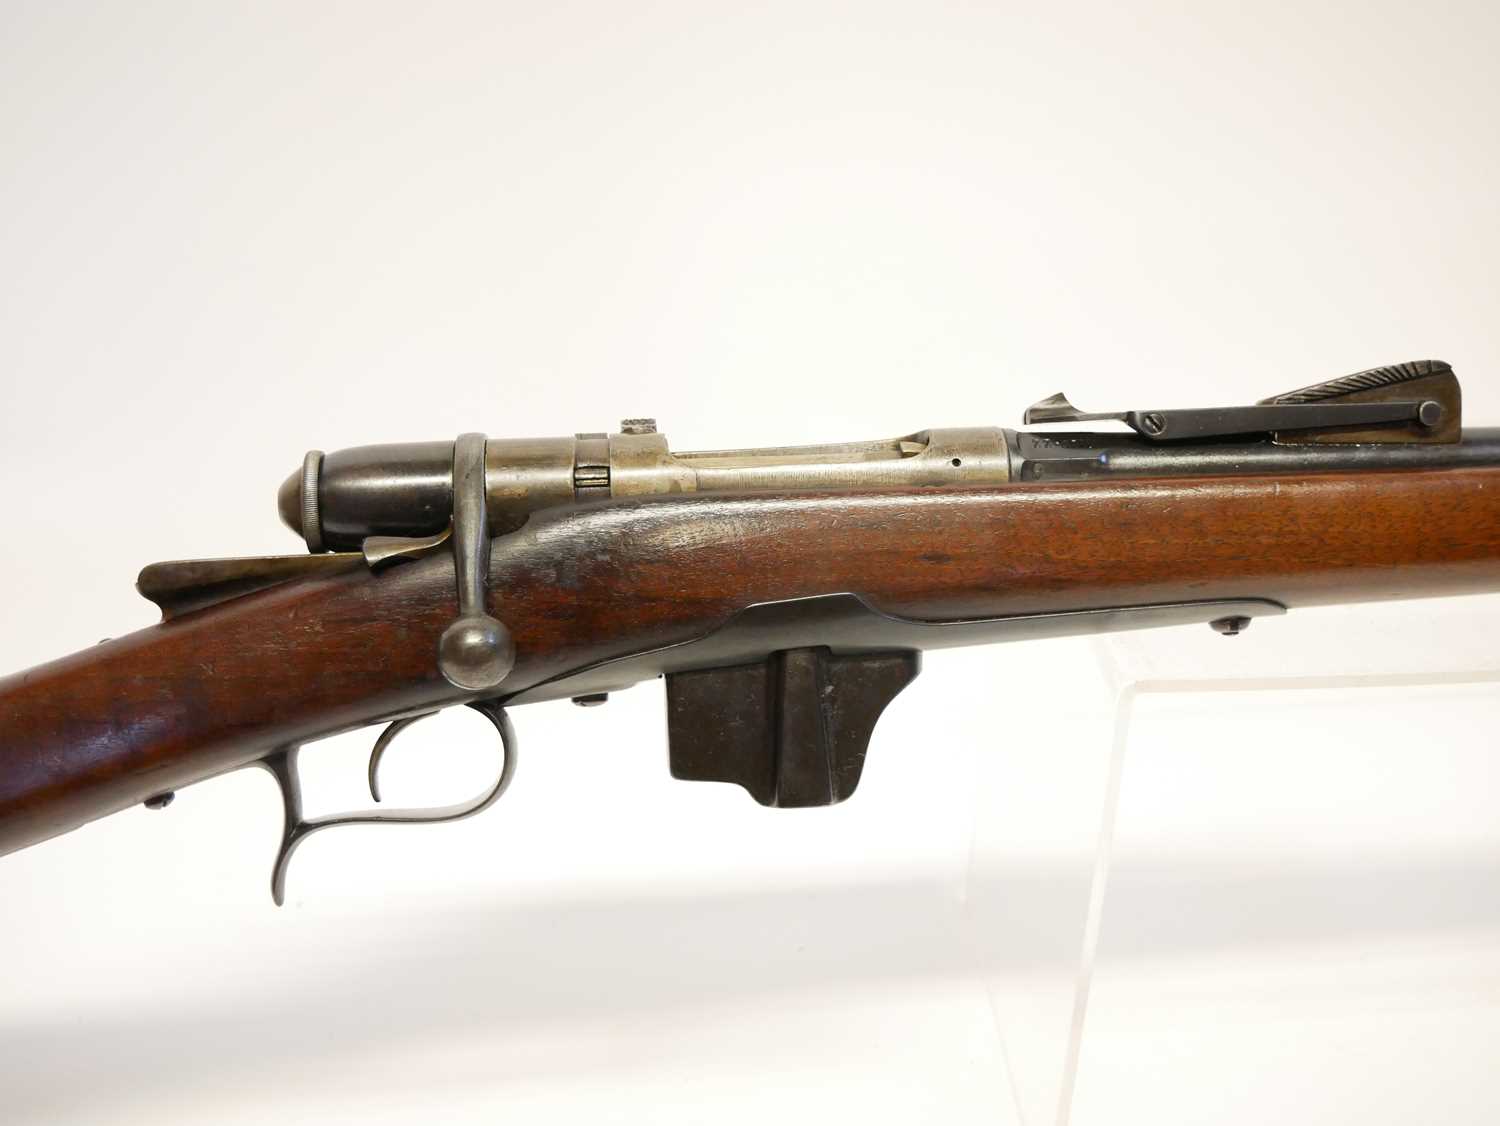 Italian Vetterli M.1870/87 10.35x47R bolt action rifle, serial number 5778, 33.5inch barrel fitted - Image 6 of 17